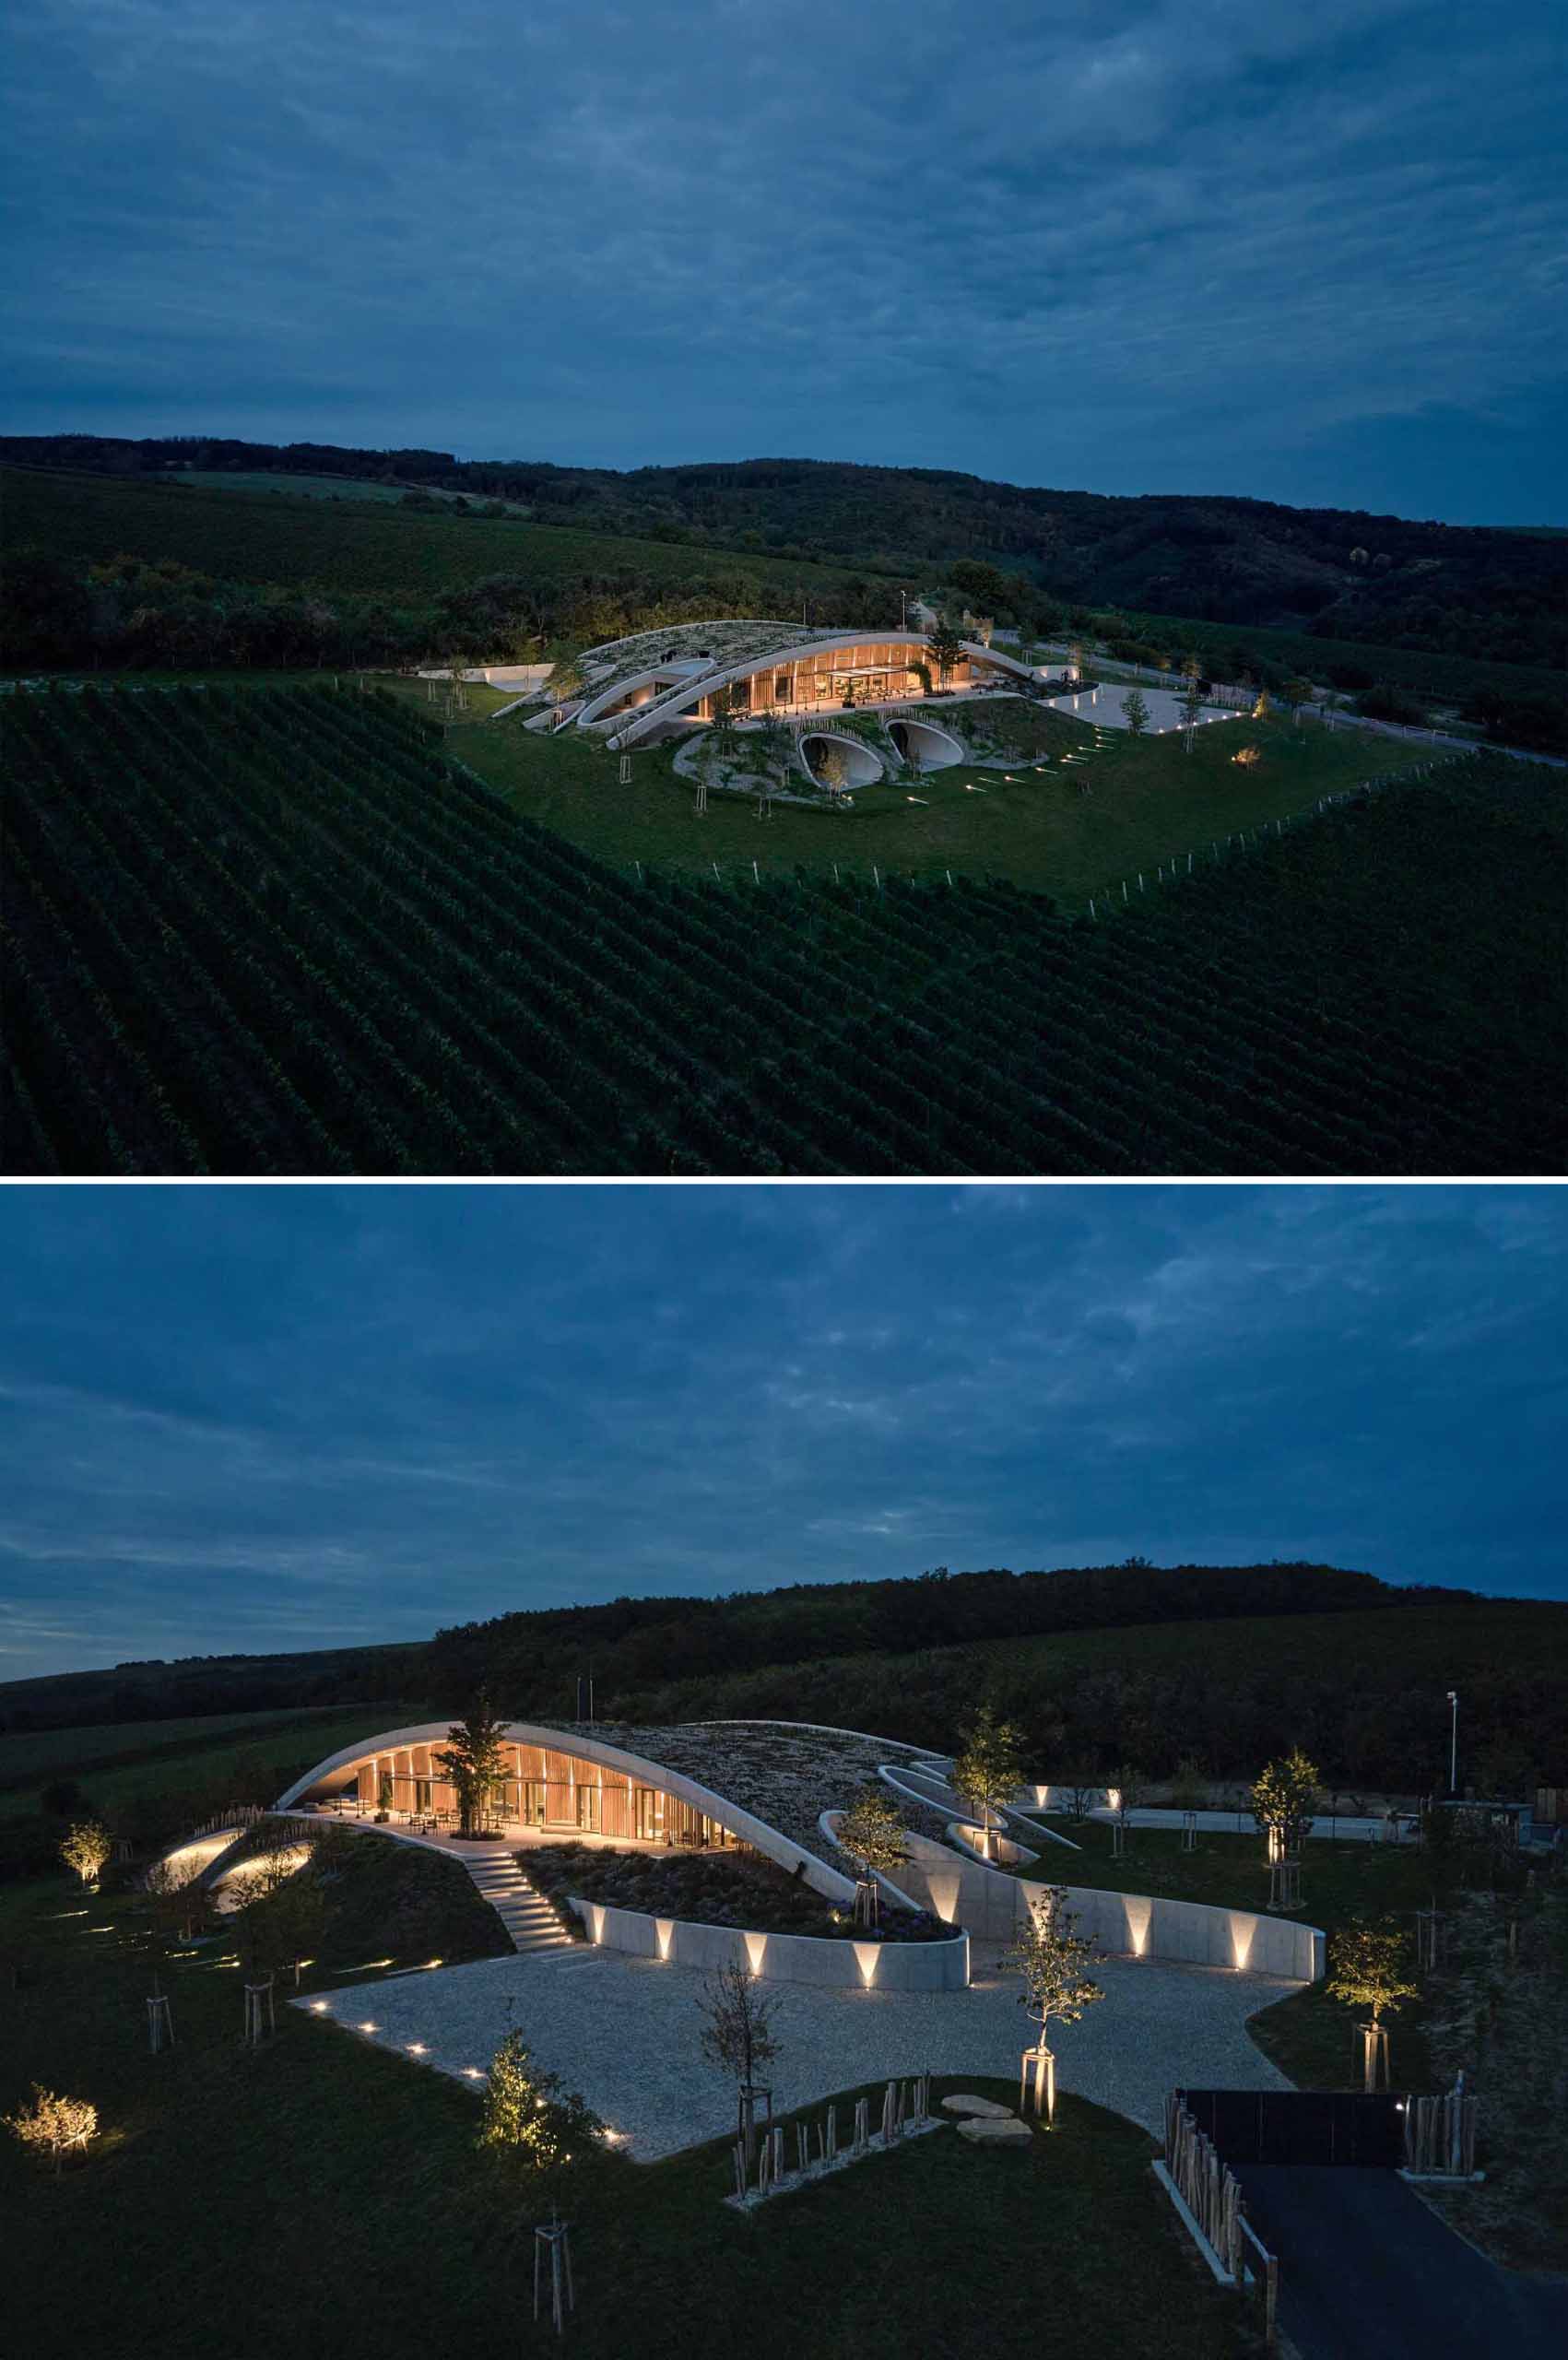 A modern winery has exterior lighting that glows in the night landscape.